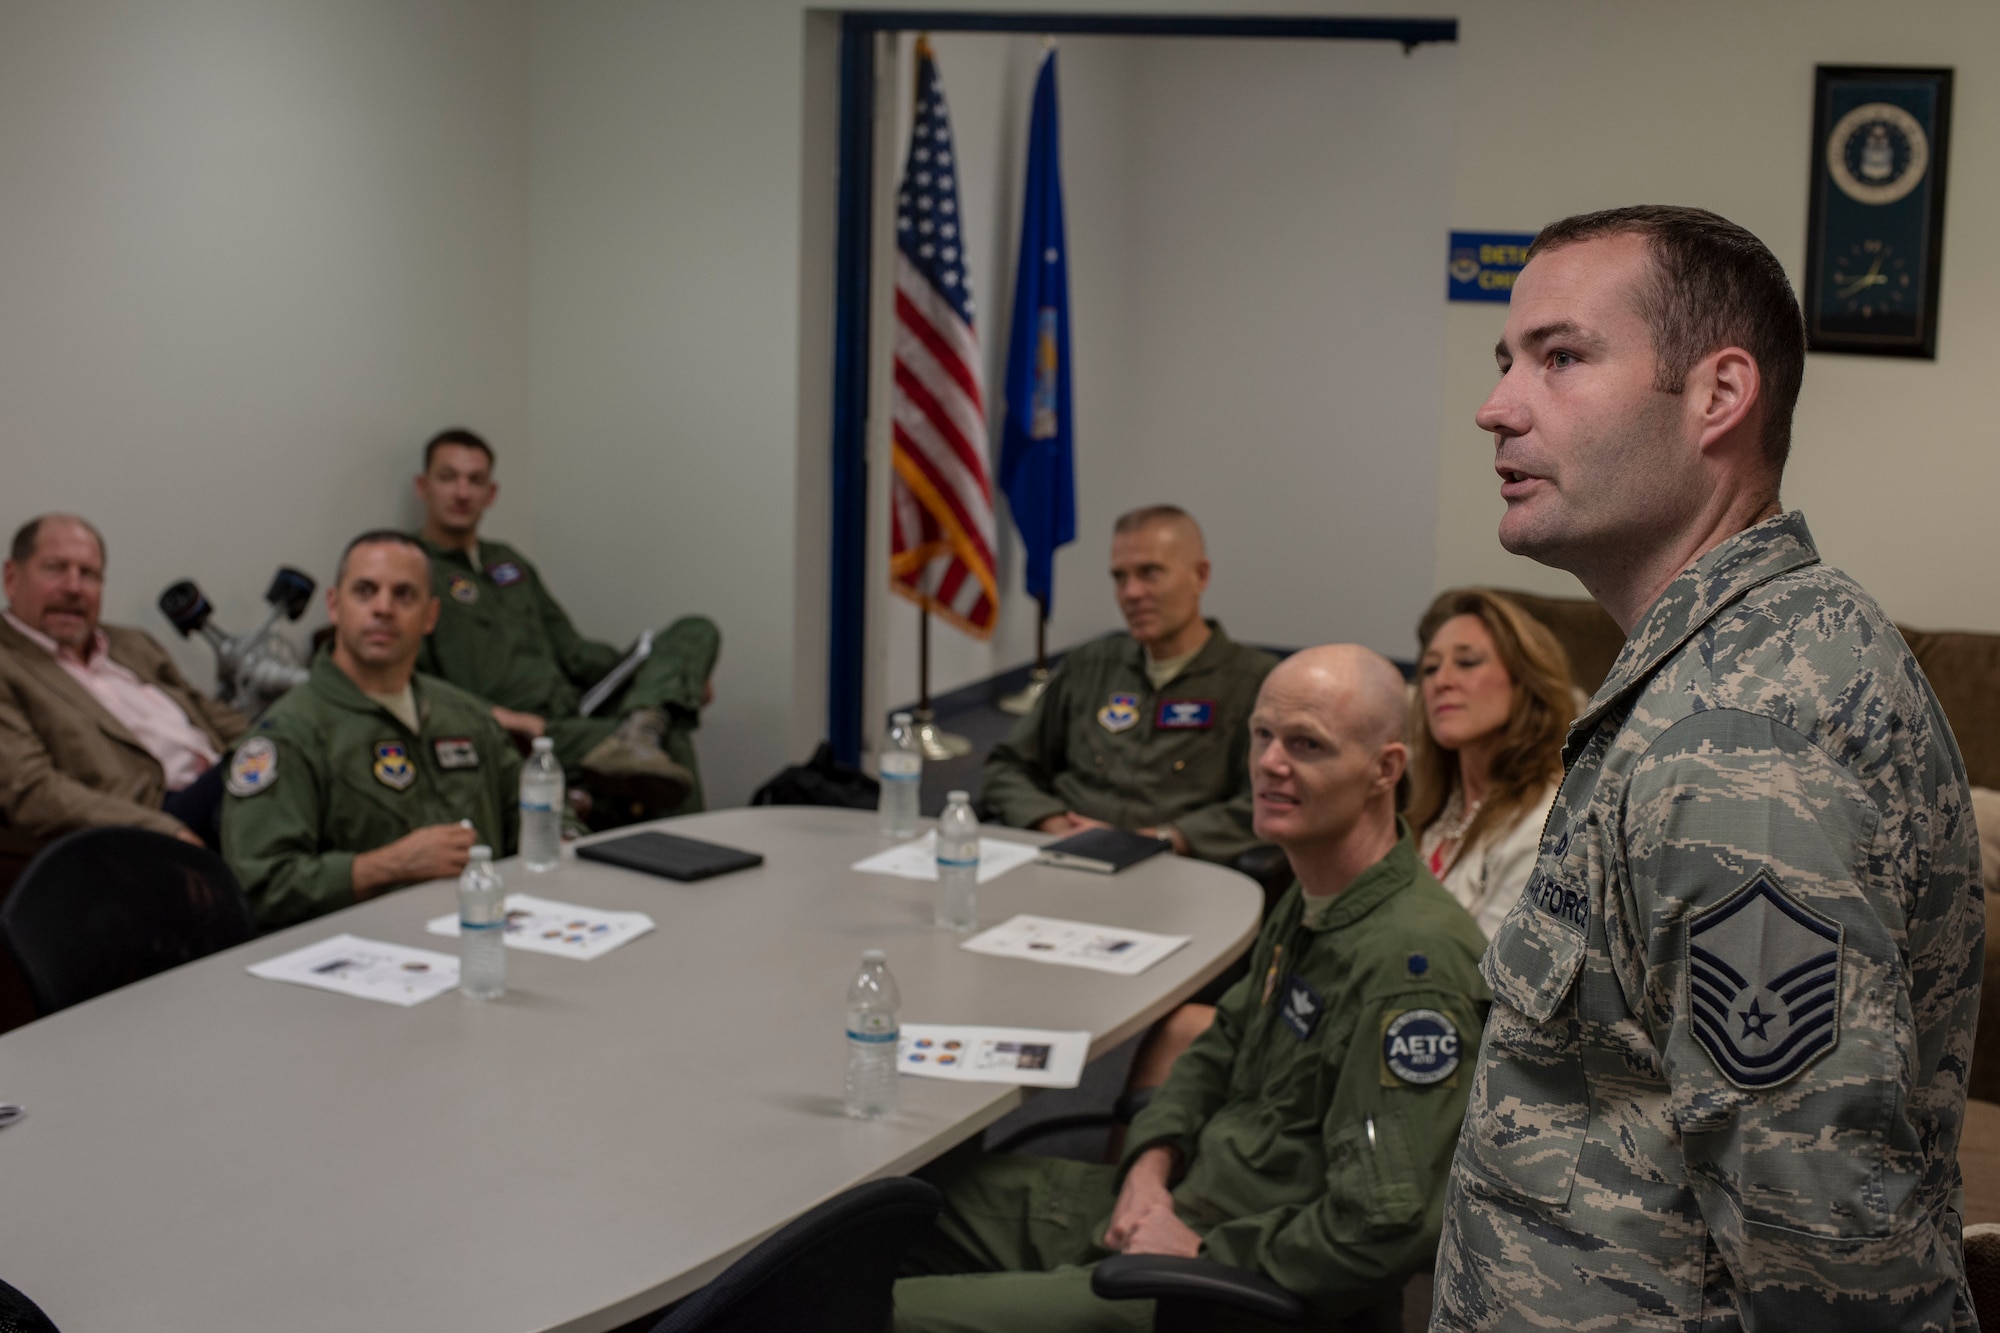 U.S. Air Force Master Sgt. Jon Adams, the 372nd Training Squadron, Detachment 23 chief, briefs Lt. Gen. Steven Kwast, commander of Air Education and Training Command, on the detachment’s current processes at Misawa Air Base, Japan, Aug. 6, 2018. Adams informed Kwast of his unit’s daily operations in order to give him a better understanding of their procedures and mission. Kwast’s visit also increased bilateral coordination for the F-35 Lightning II program as well as reaffirmed AETC’s training and support roles in the region. (U.S. Air Force photo by Airman 1st Class Collette Brooks)